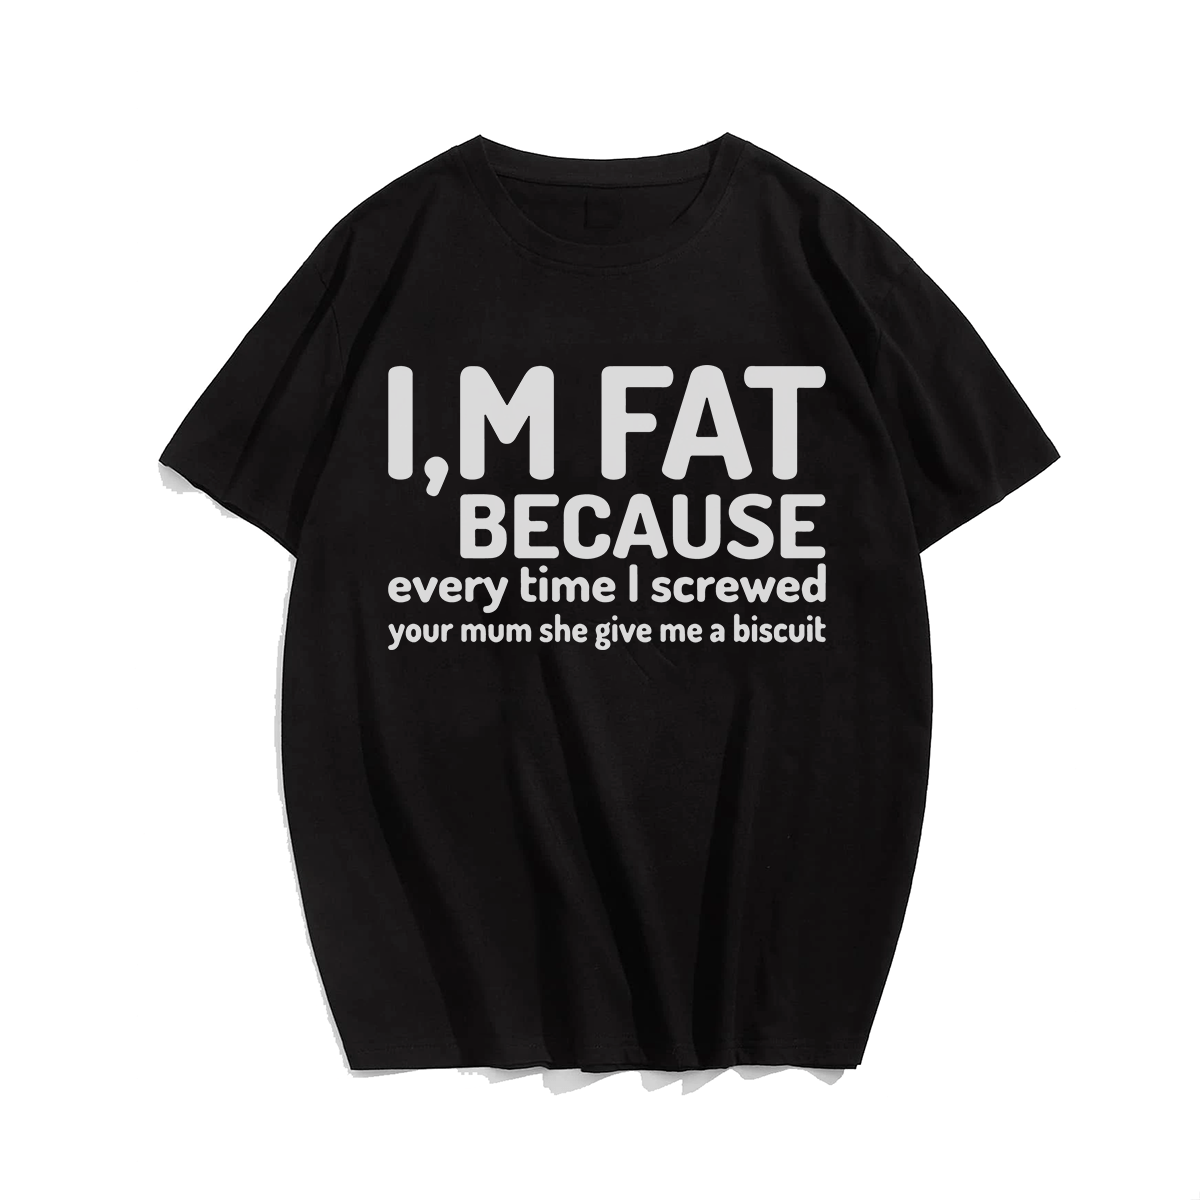 I'm Fat Because T-shirt for Men, Oversize Plus Size Big & Tall Man Clothing